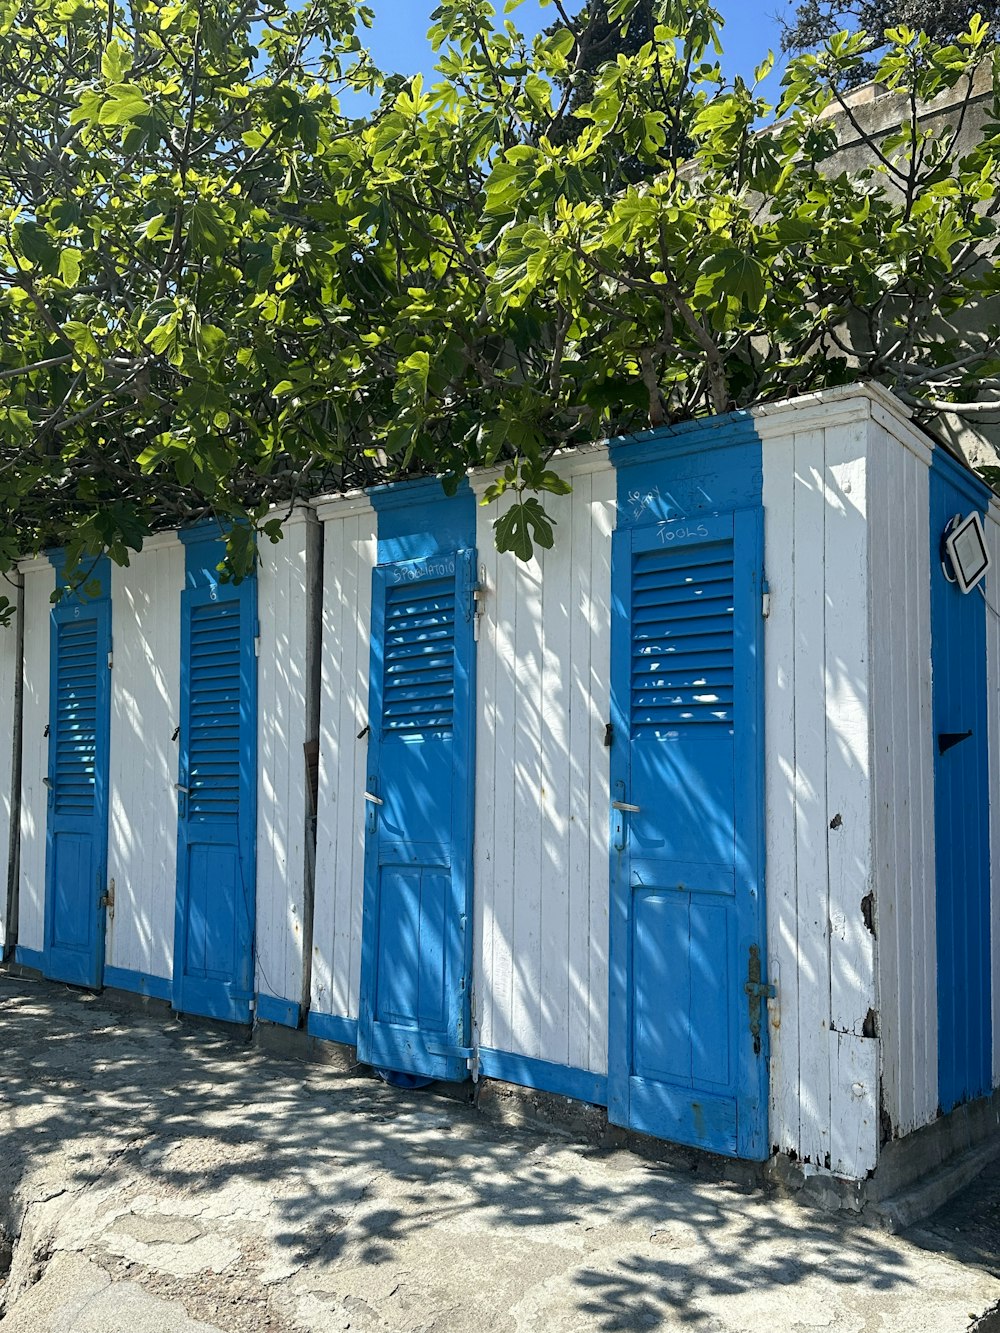 a row of blue and white beach huts under a tree